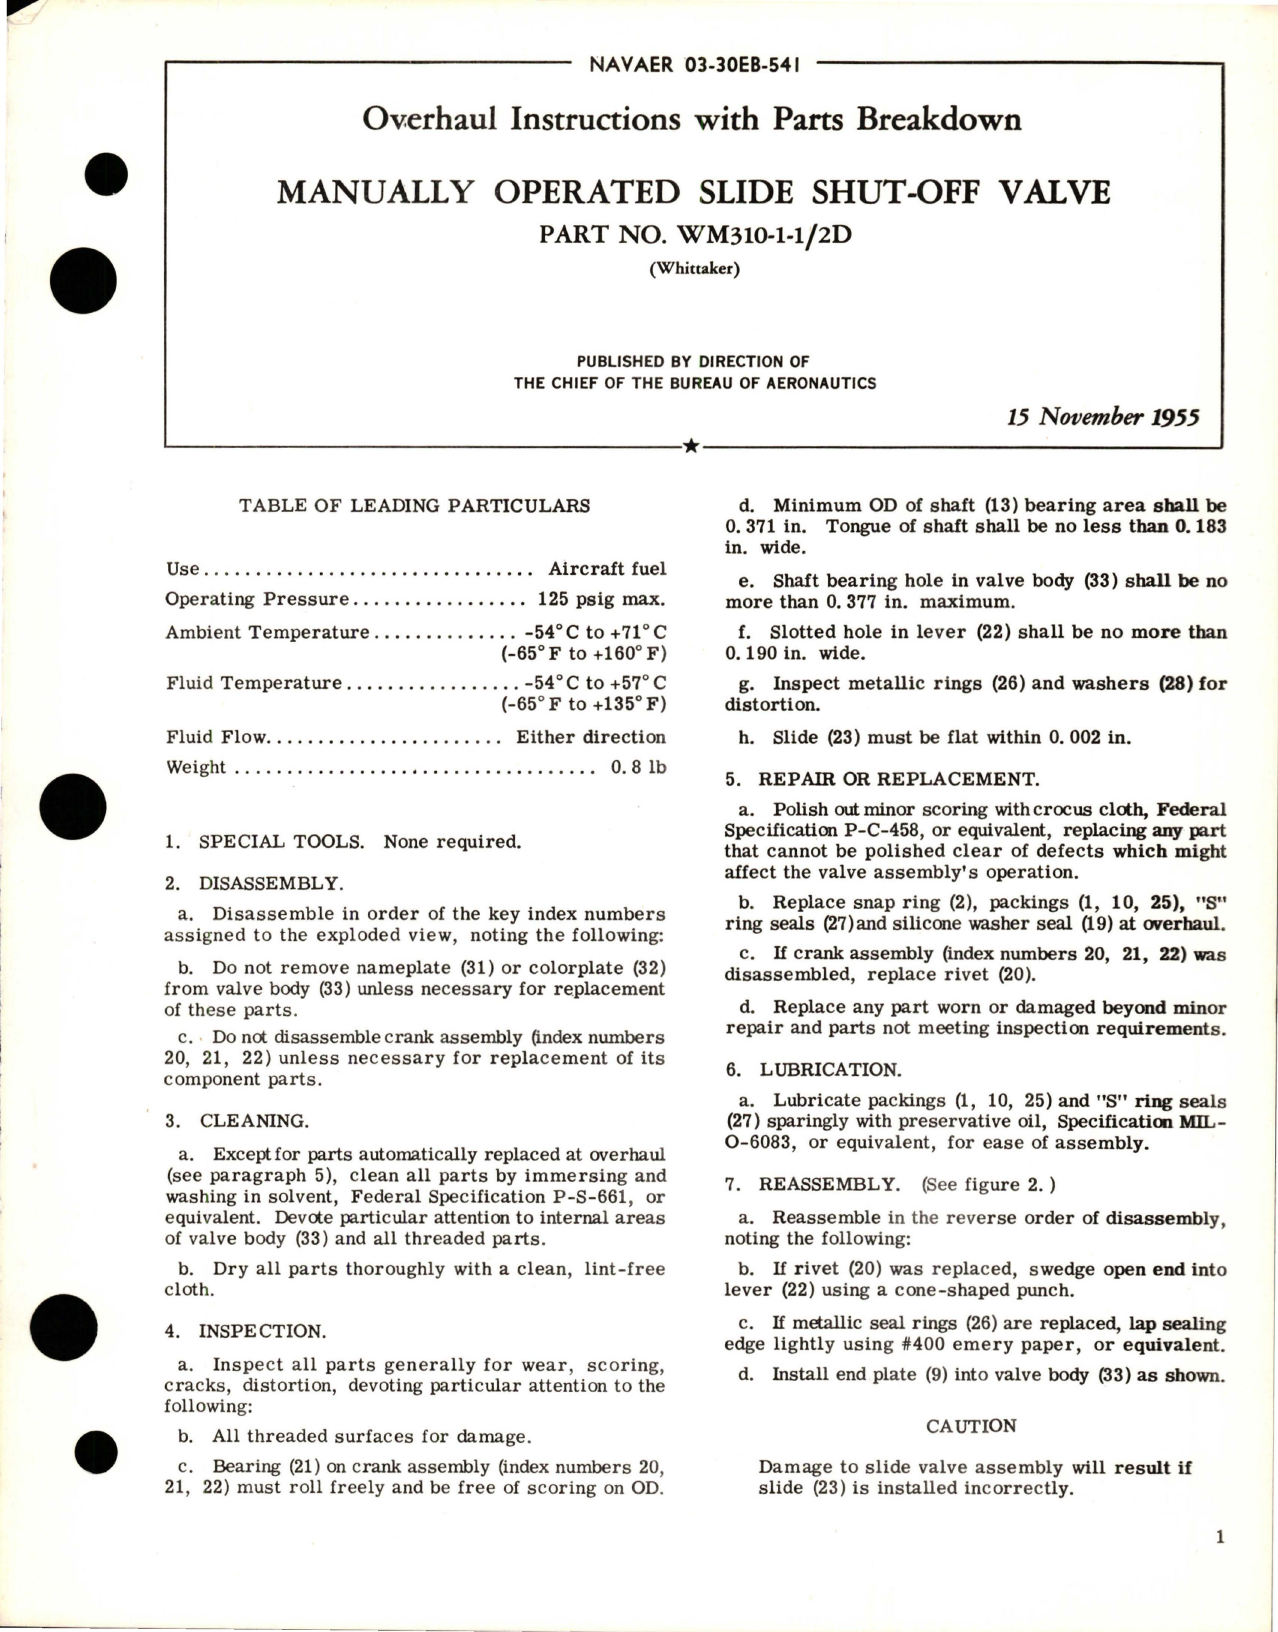 Sample page 1 from AirCorps Library document: Overhaul Instructions with Parts for Manually Operated Slide Shut Off Valve - Part WM310-1-1/2D